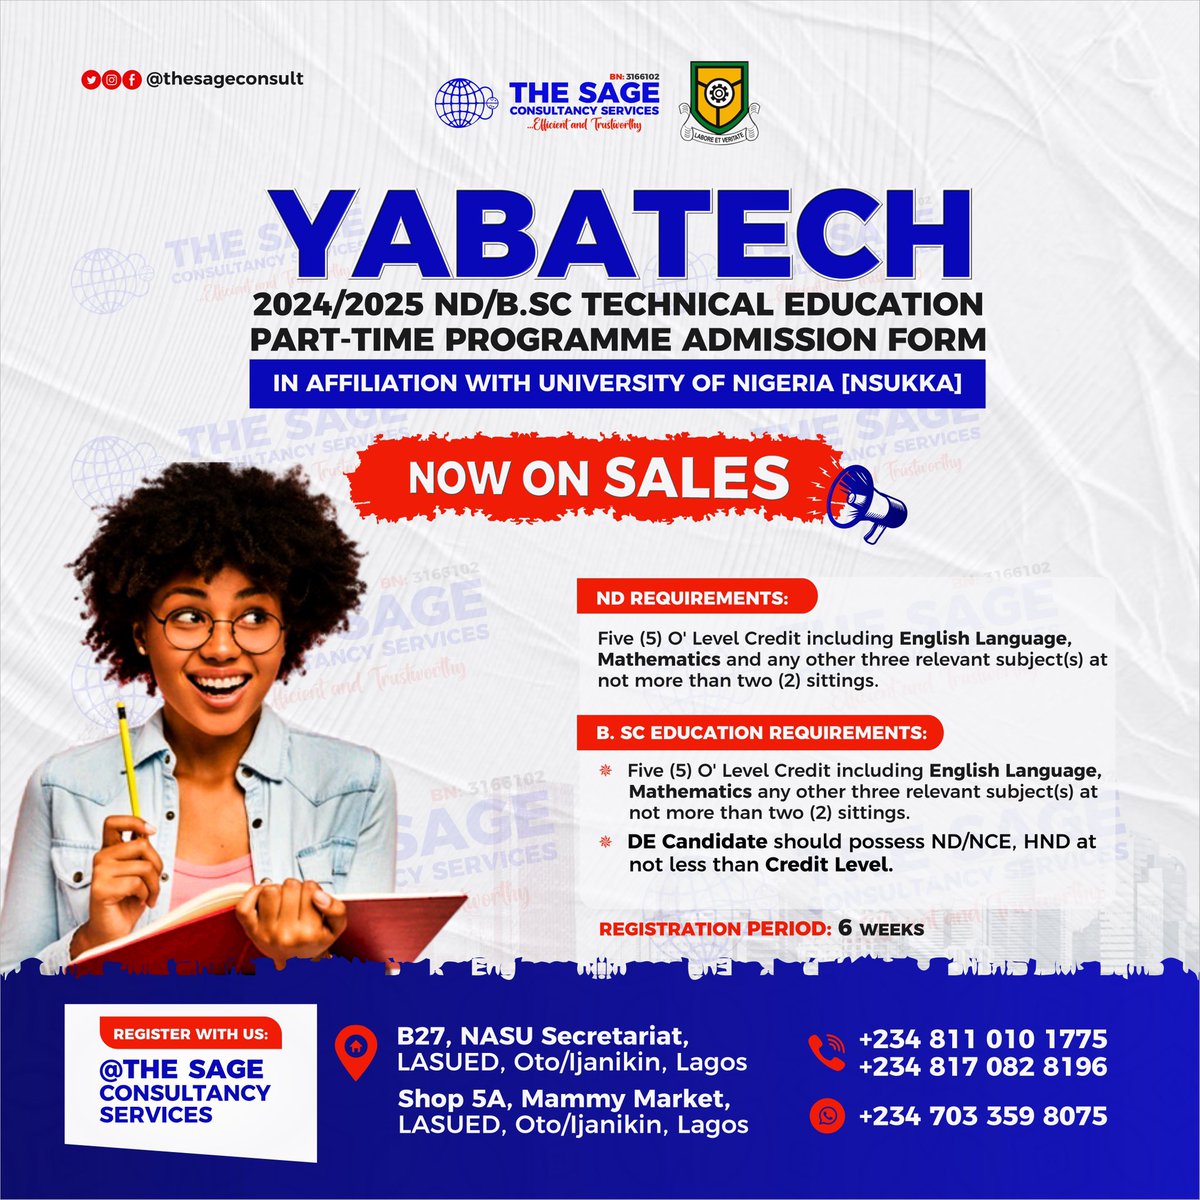 YABATECH PART_TIME PROGRAM ADMISSION SCREENING FORM IS ONGOING!

Get your registration done with us today  @thesageconsult.
Click on the link in our bio or Chat via WhatsApp at +2347033598075 to communicate with us 

#THESAGECONSULTANCYSERVICES 
#DISTANCEISNOTABARRIER